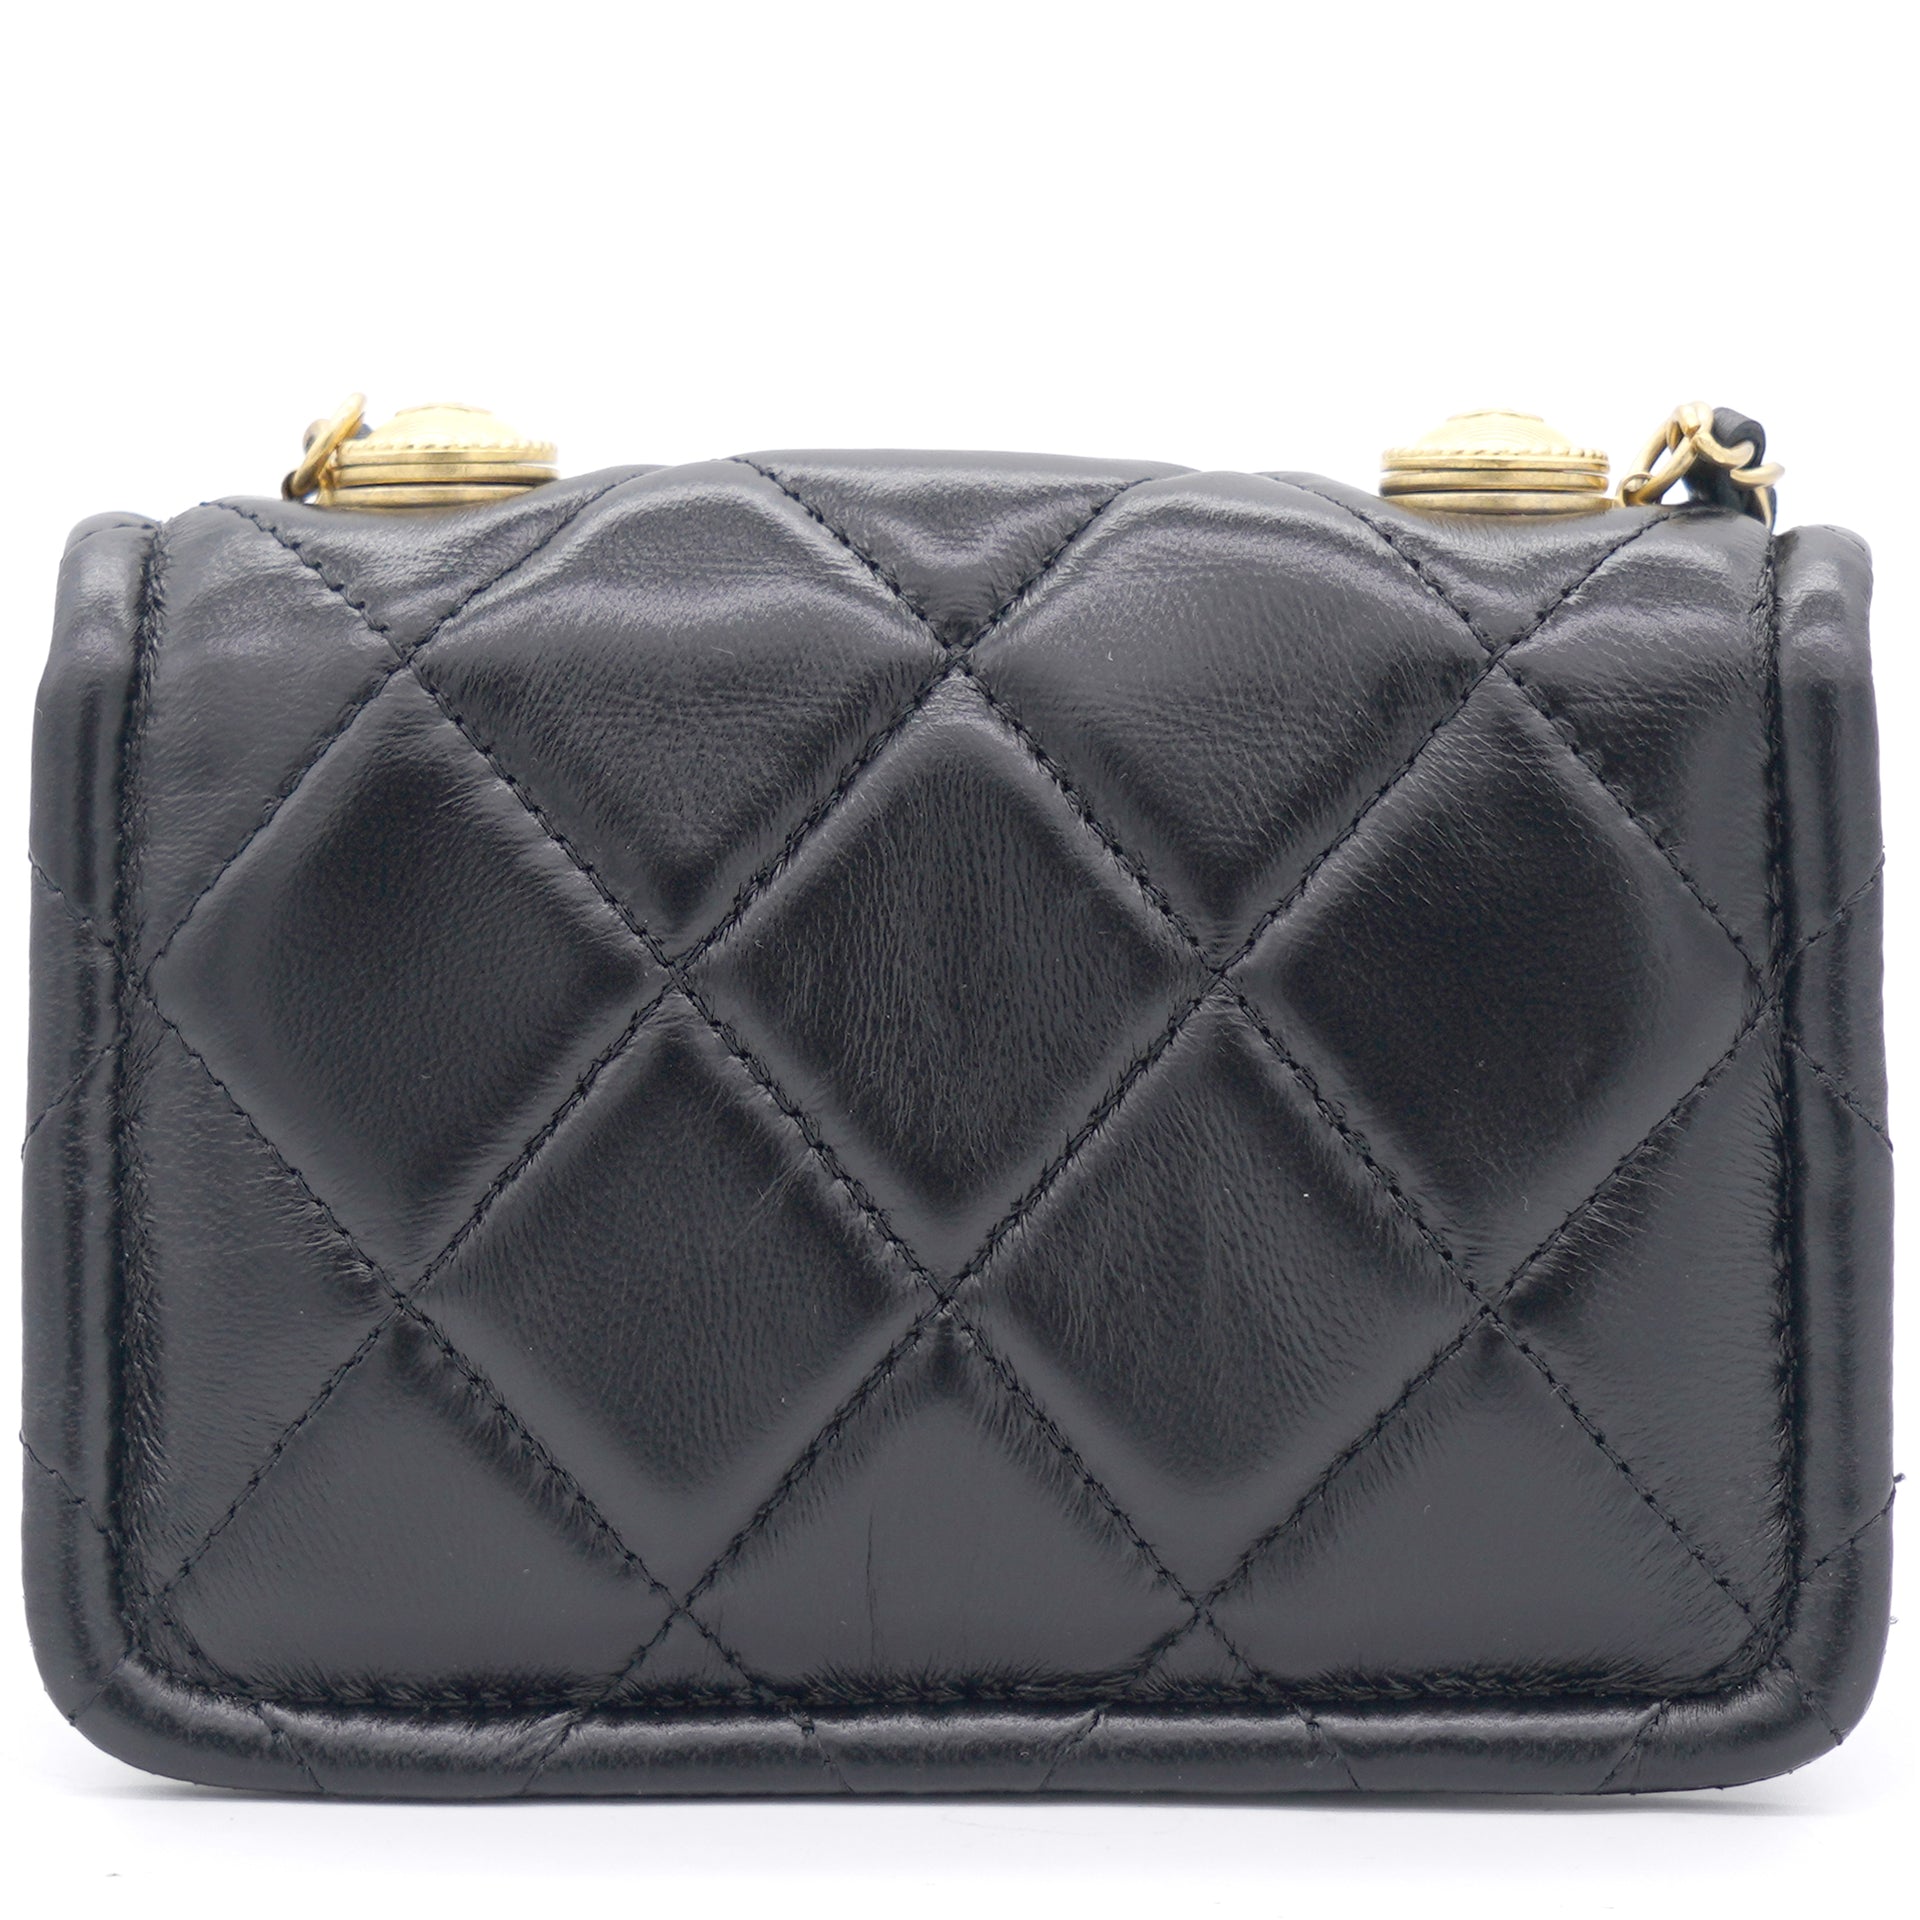 Chanel Lambskin Quilted Nano Flap Bag with button details Black